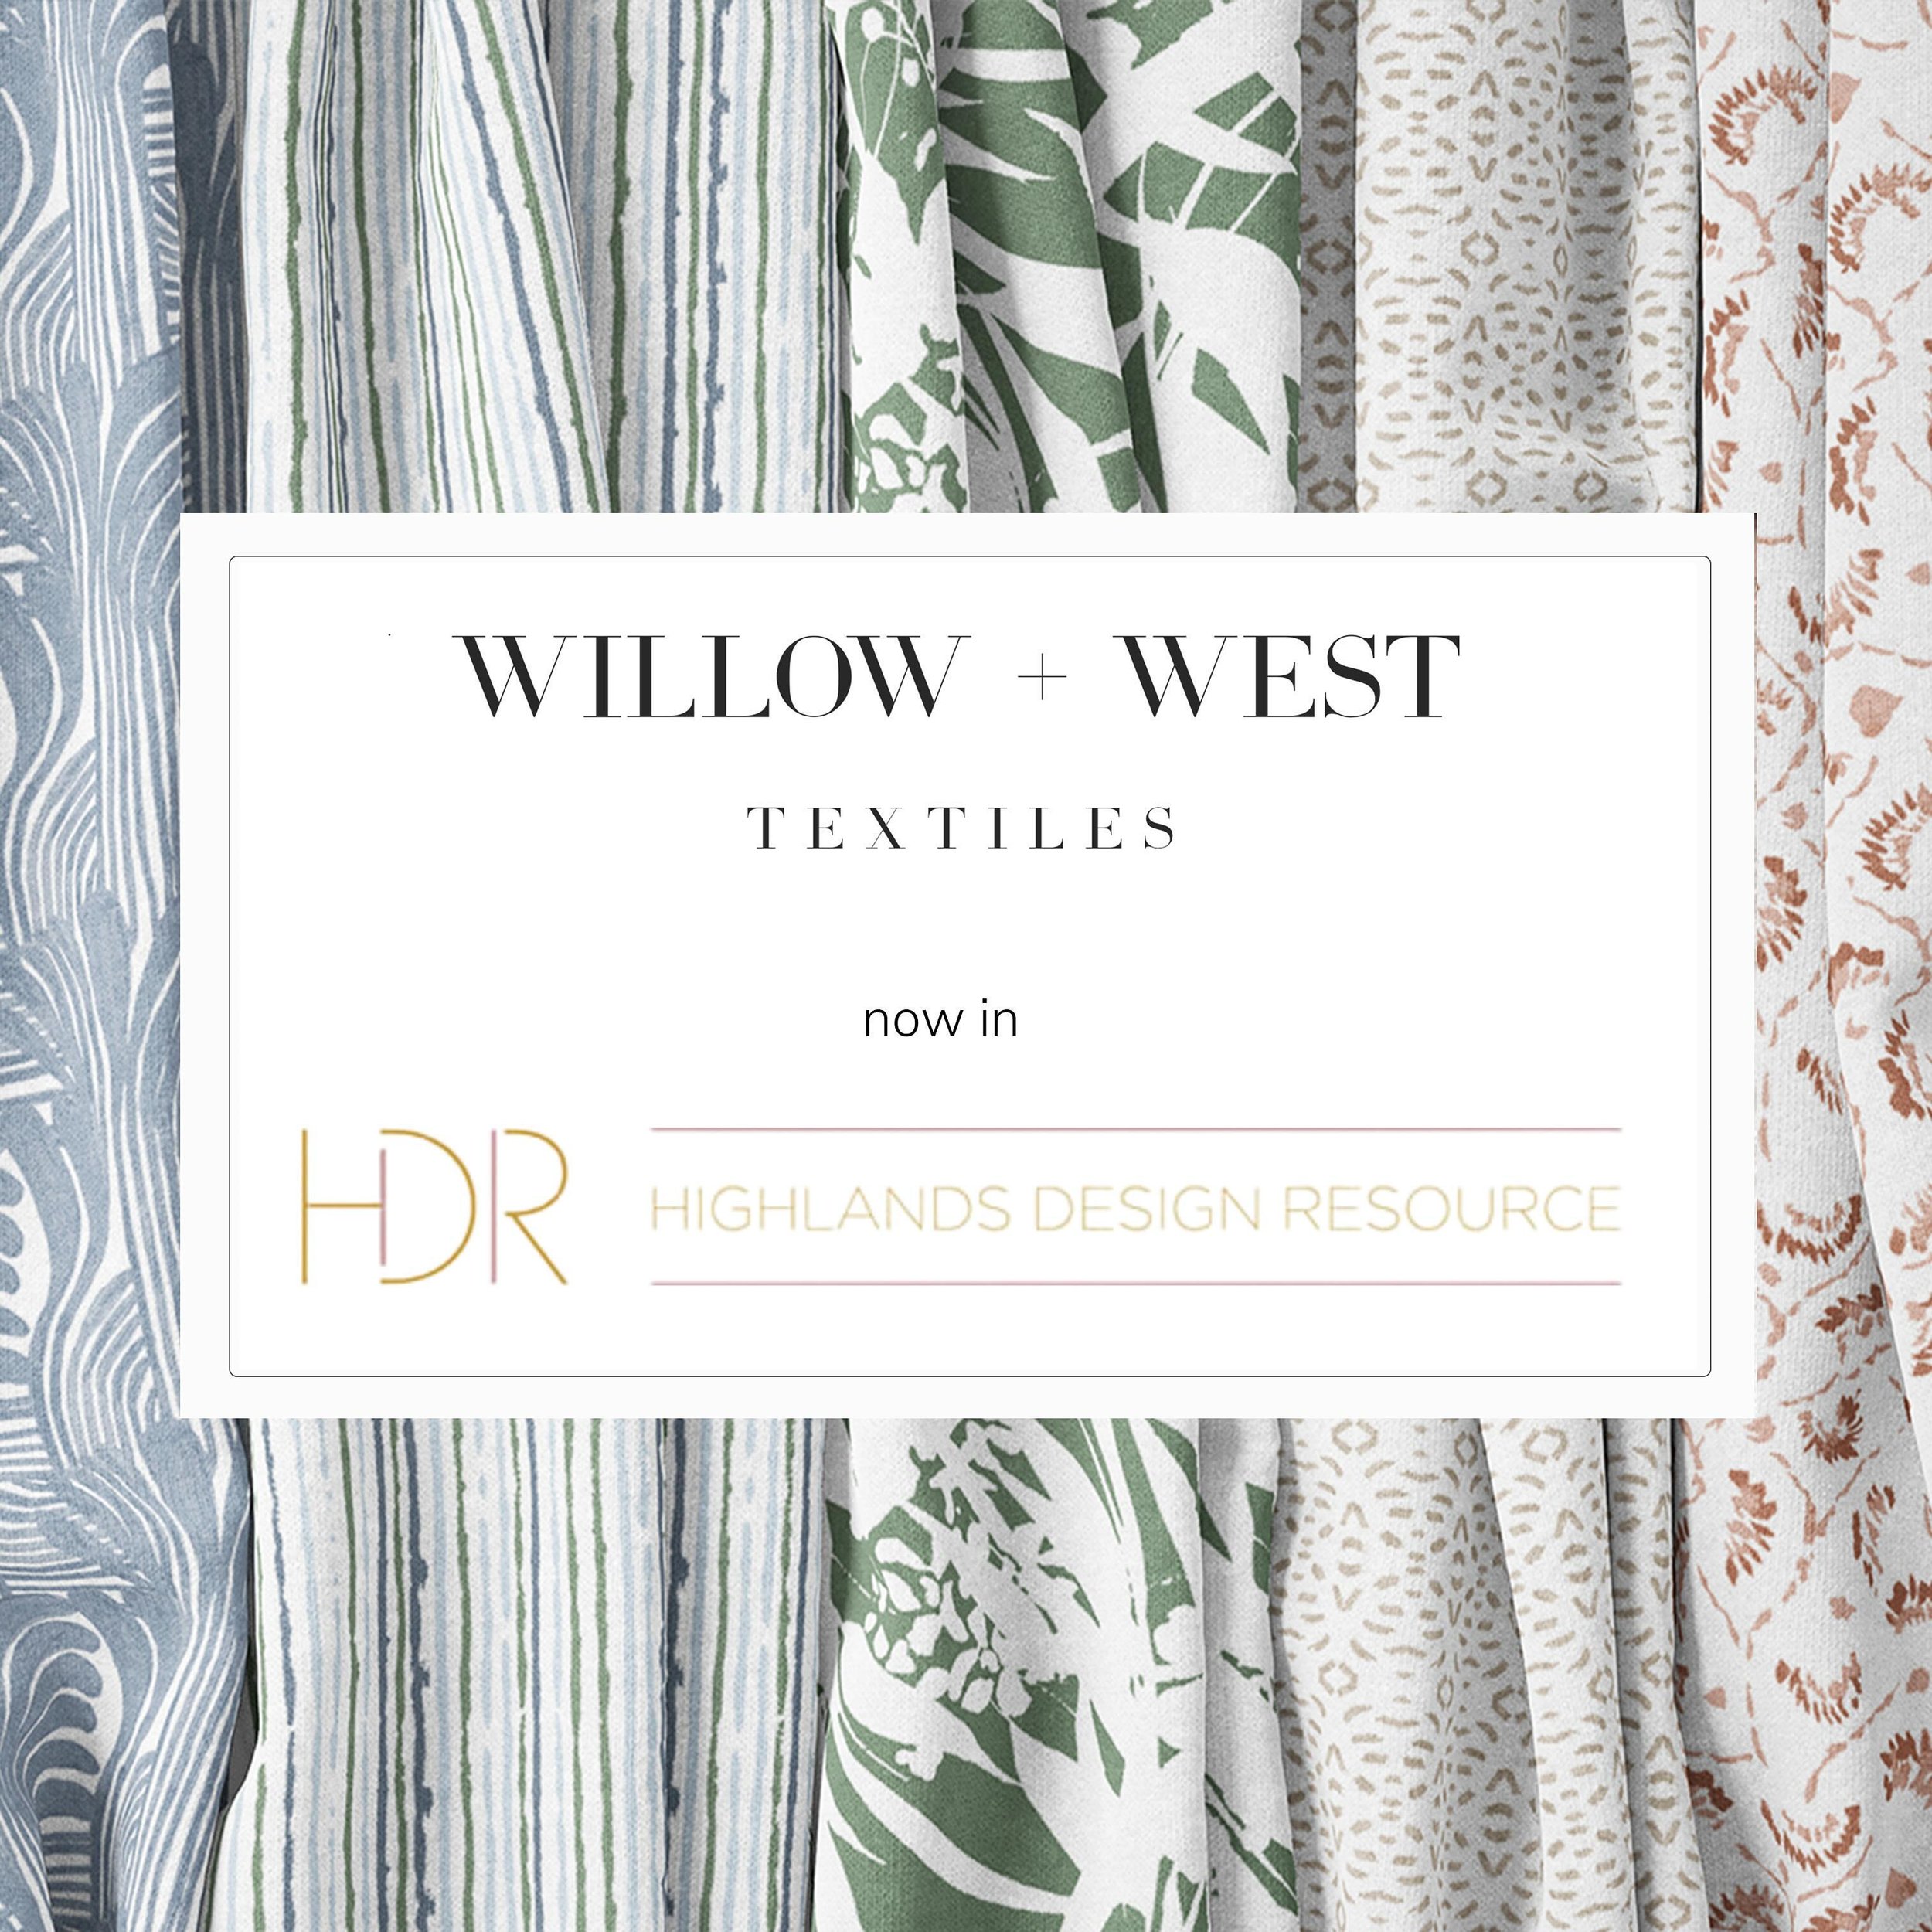 Exciting News! ✨ We&rsquo;re thrilled to share our collection is now available through @highlandsdesign 

Come check out our textile assortment at their beautiful showroom in Edgewater, CO. 
.
.
.
.
#interiordesigncolorado #denverdesign #denverdesign